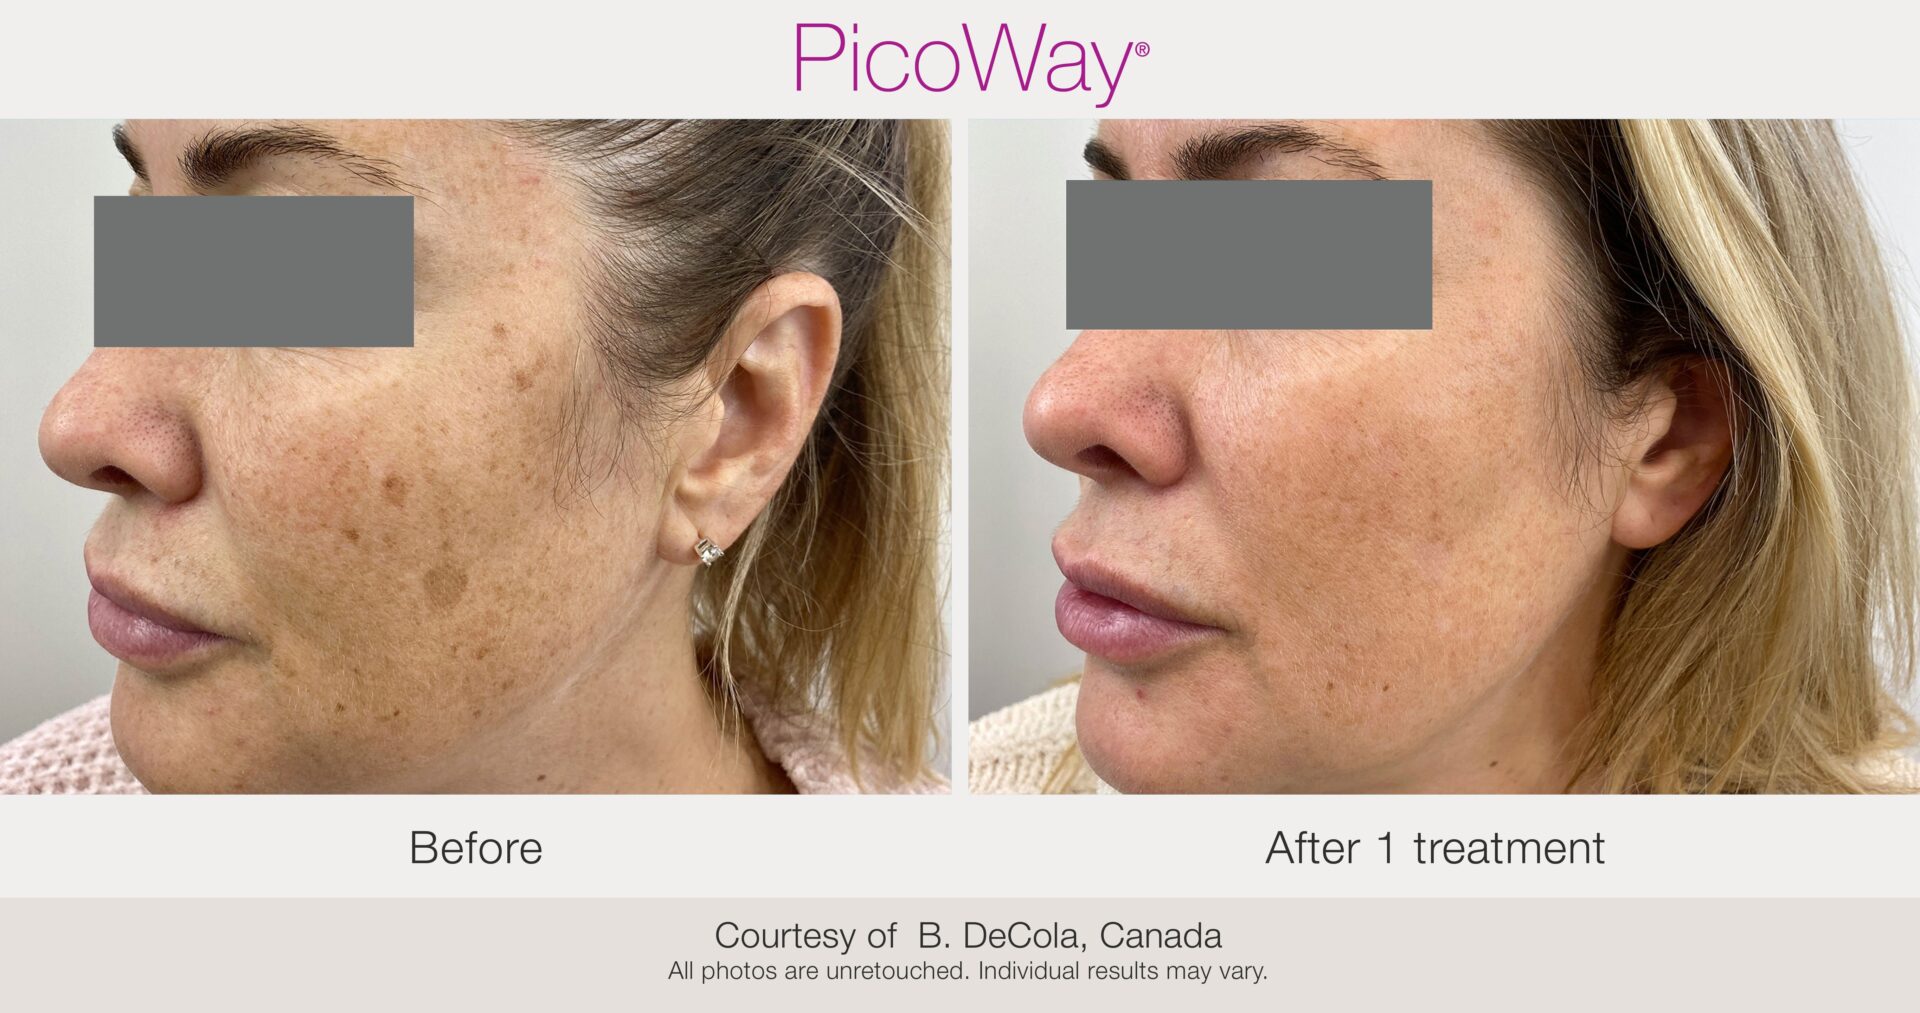 A woman 's face before and after using picoway